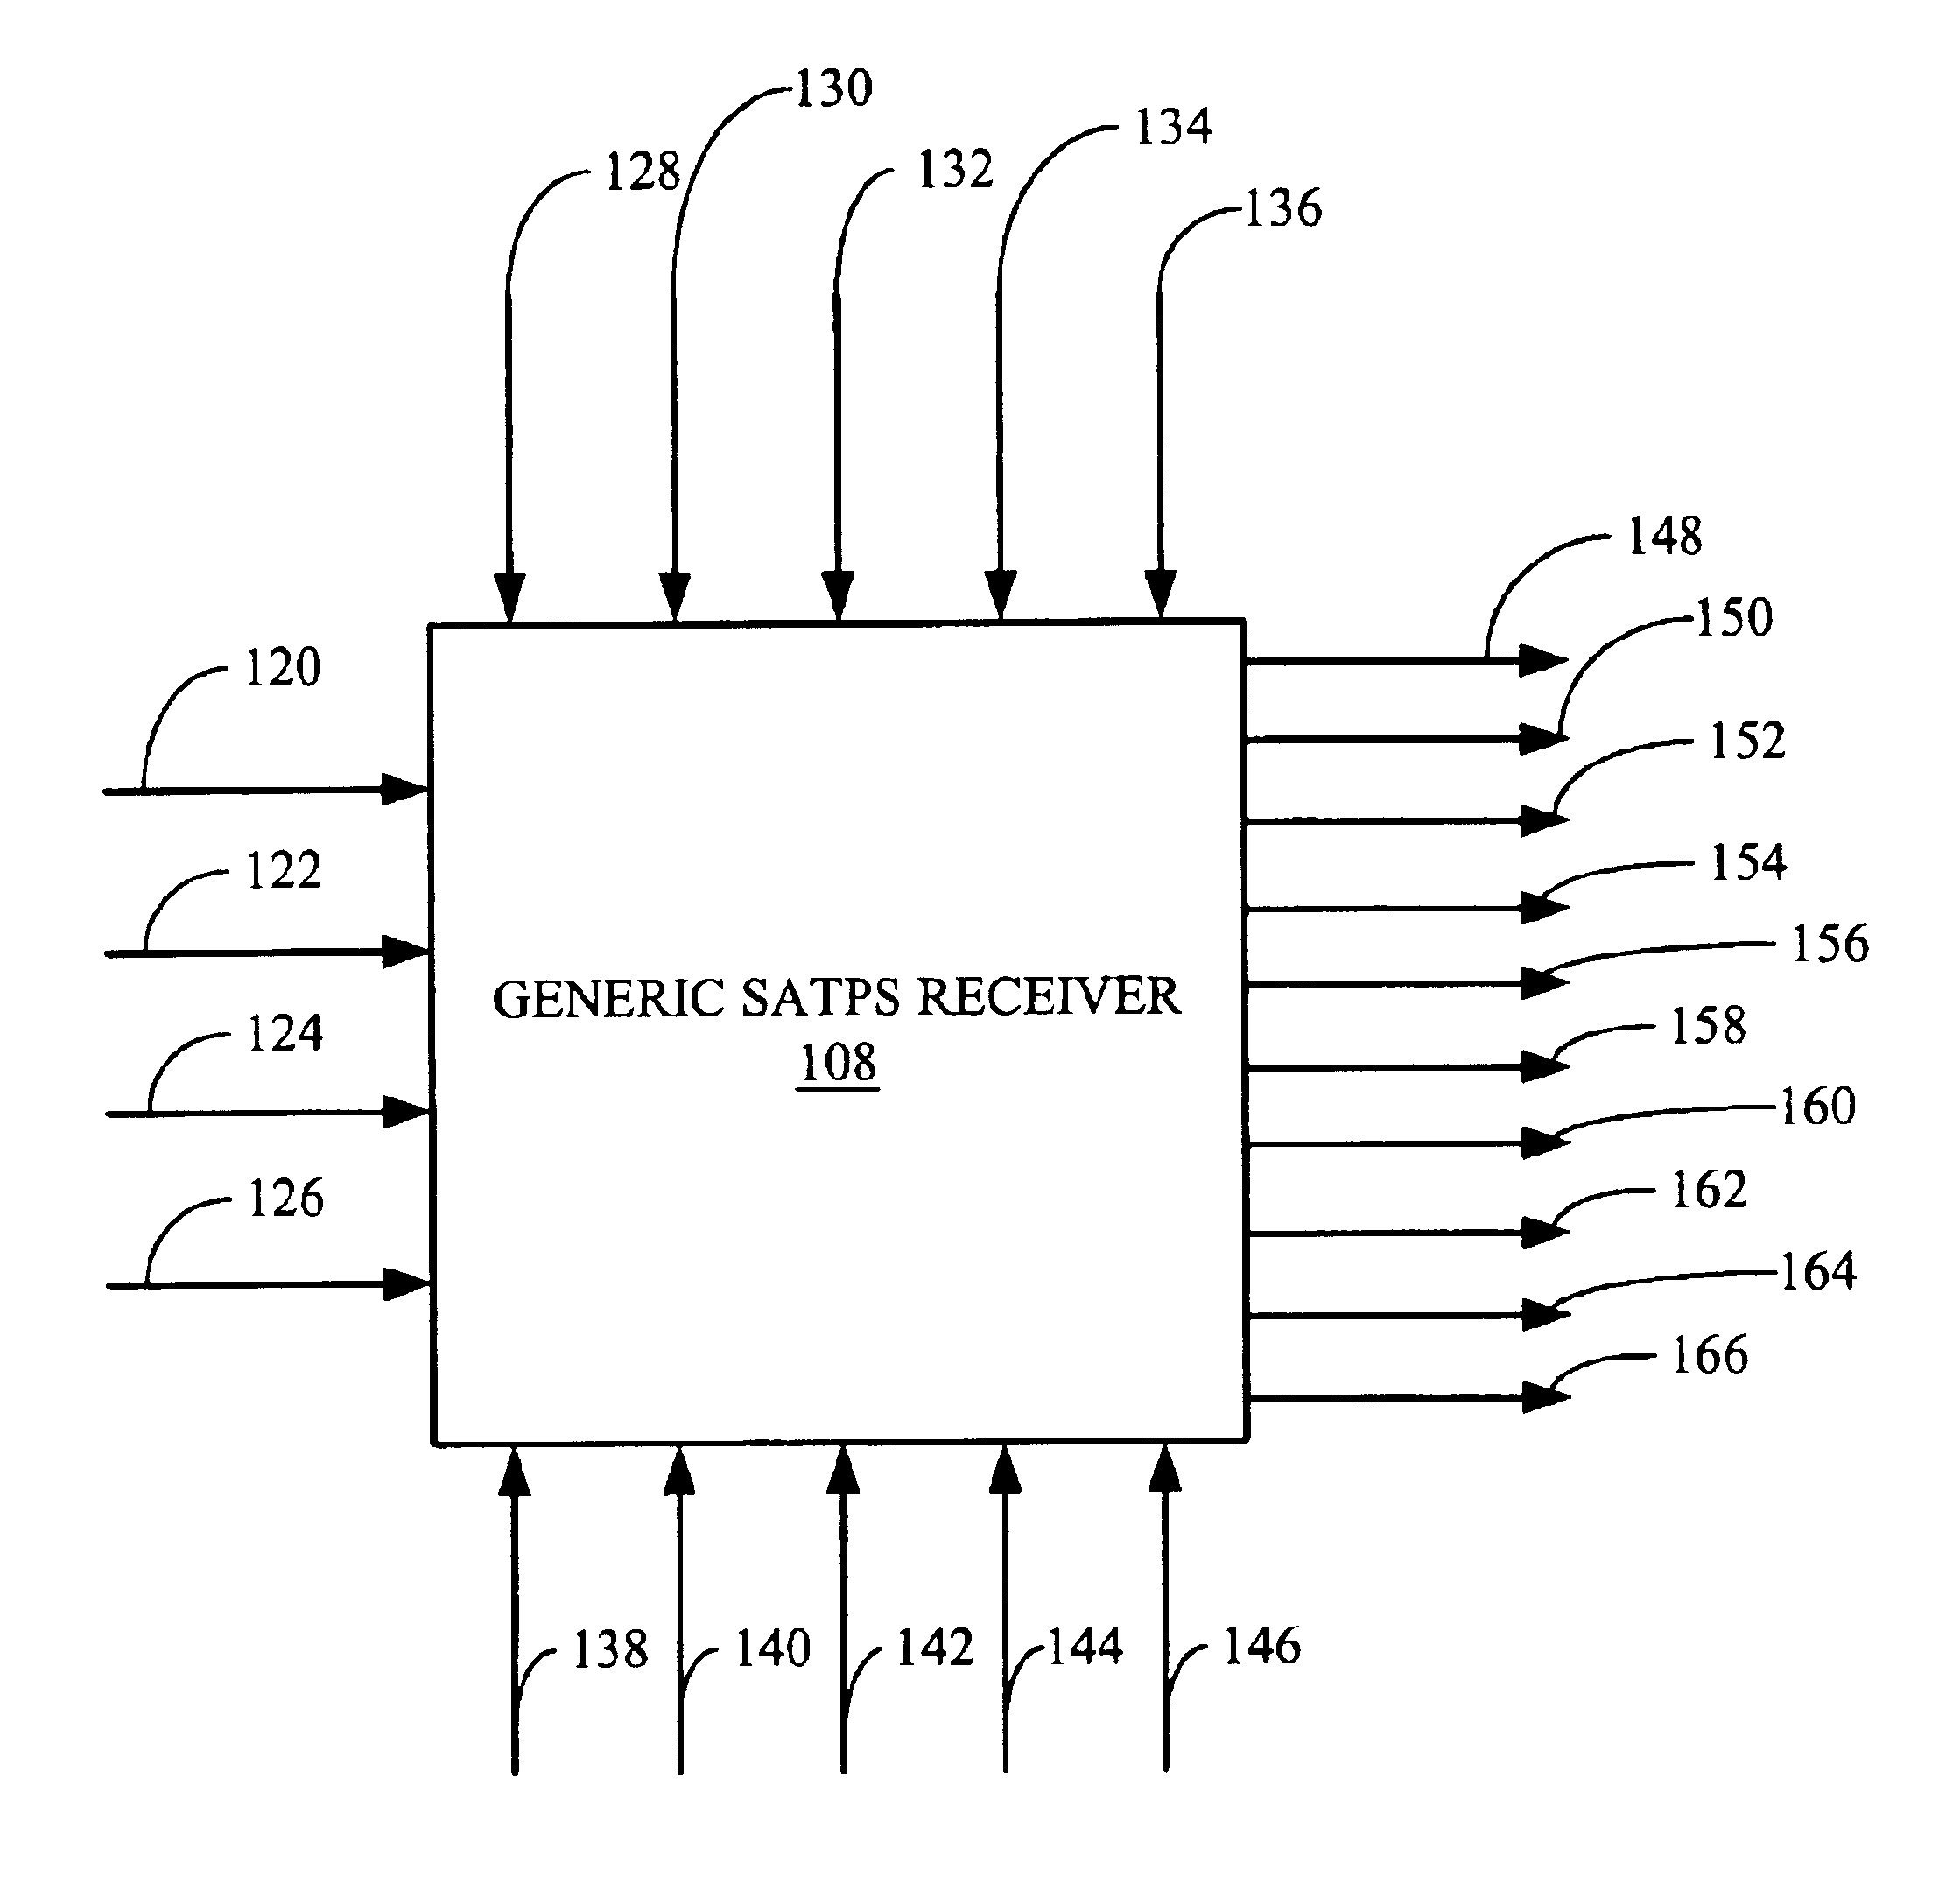 Generic satellite positioning system receivers with programmable inputs